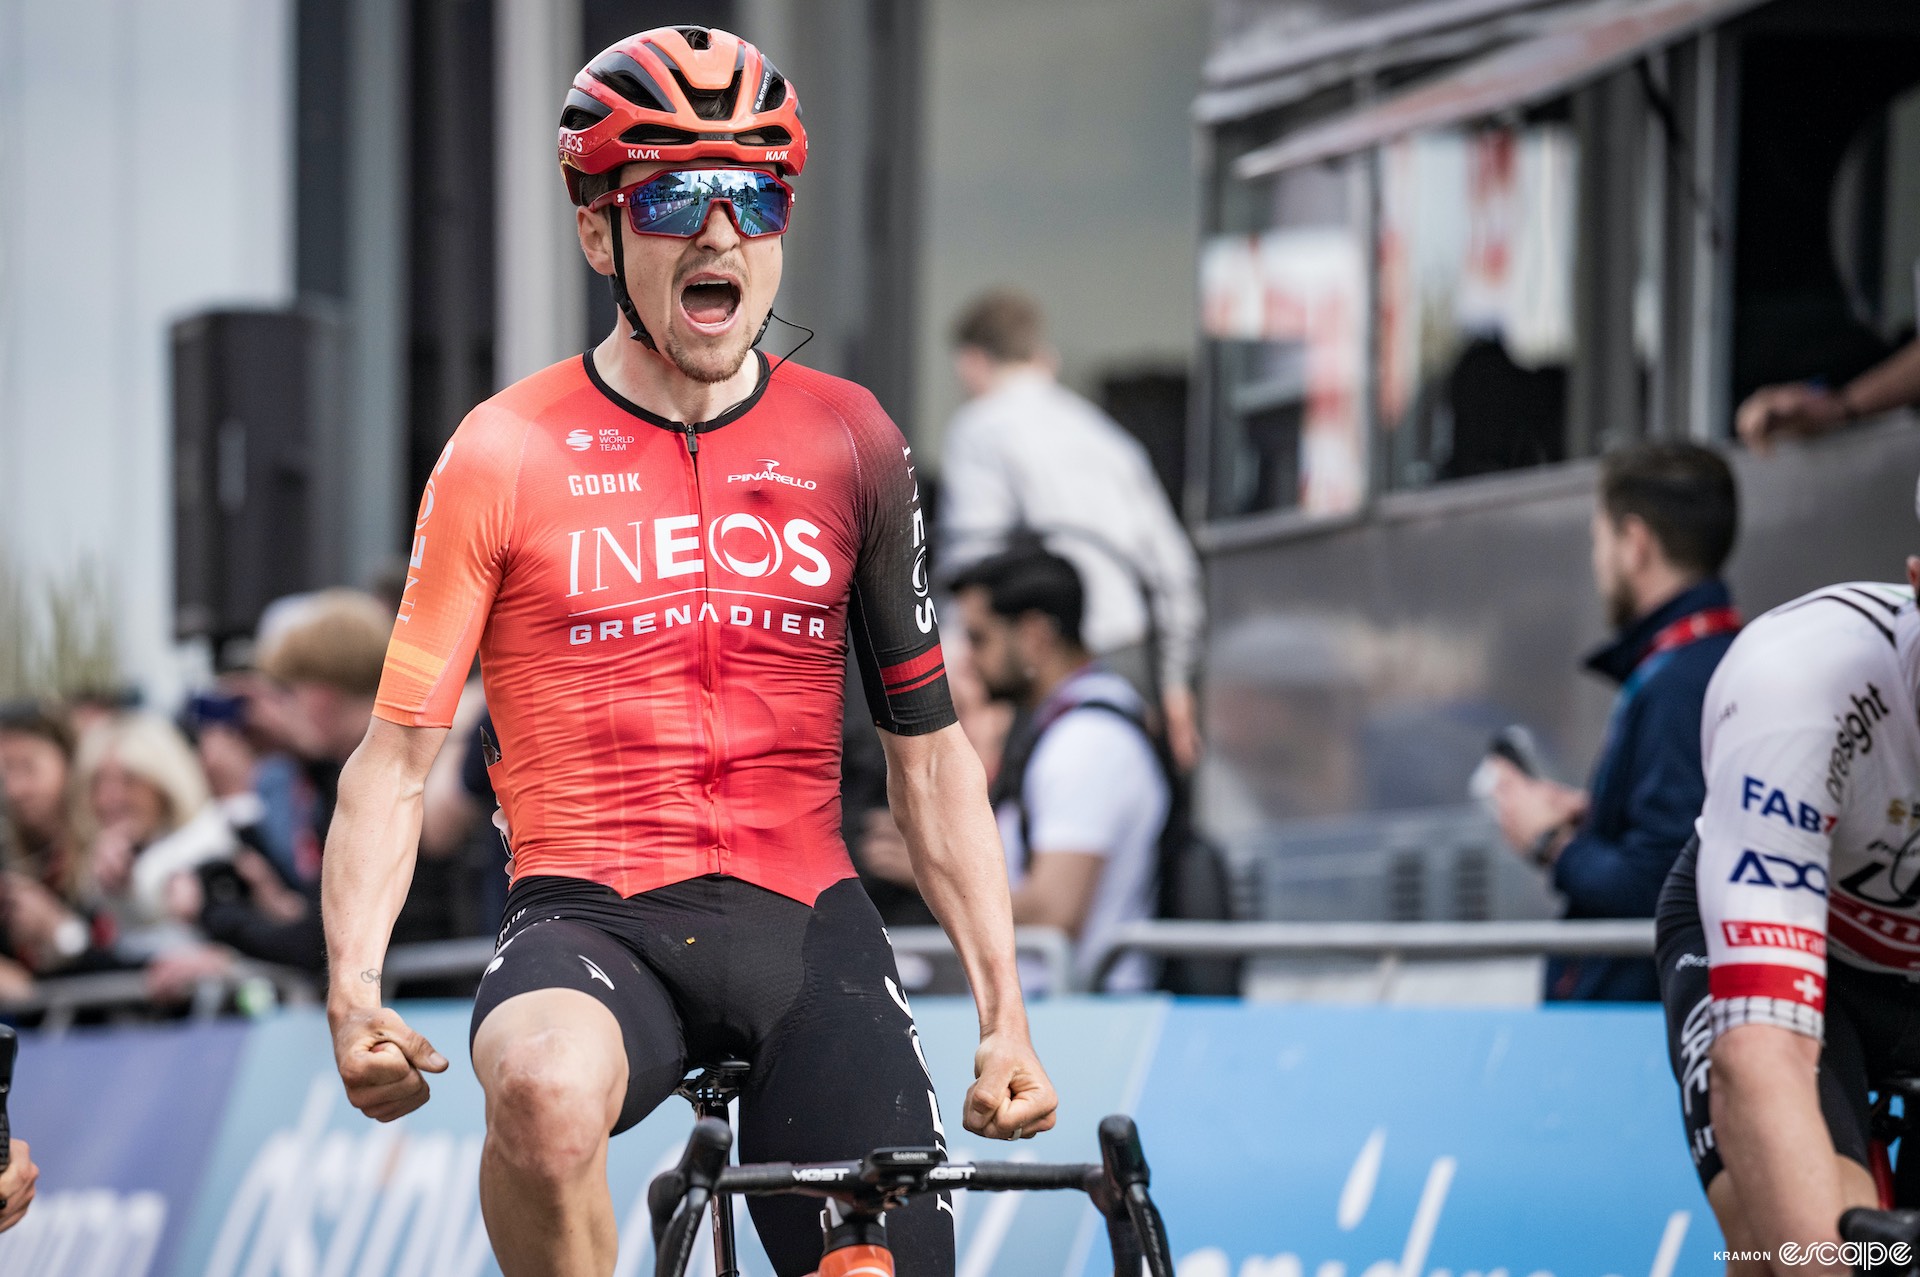 Tom Pidcock posts up for the win at the Amstel Gold Race. His mouth is open in a shout as he clenches his fists at his side after winning the small group sprint.